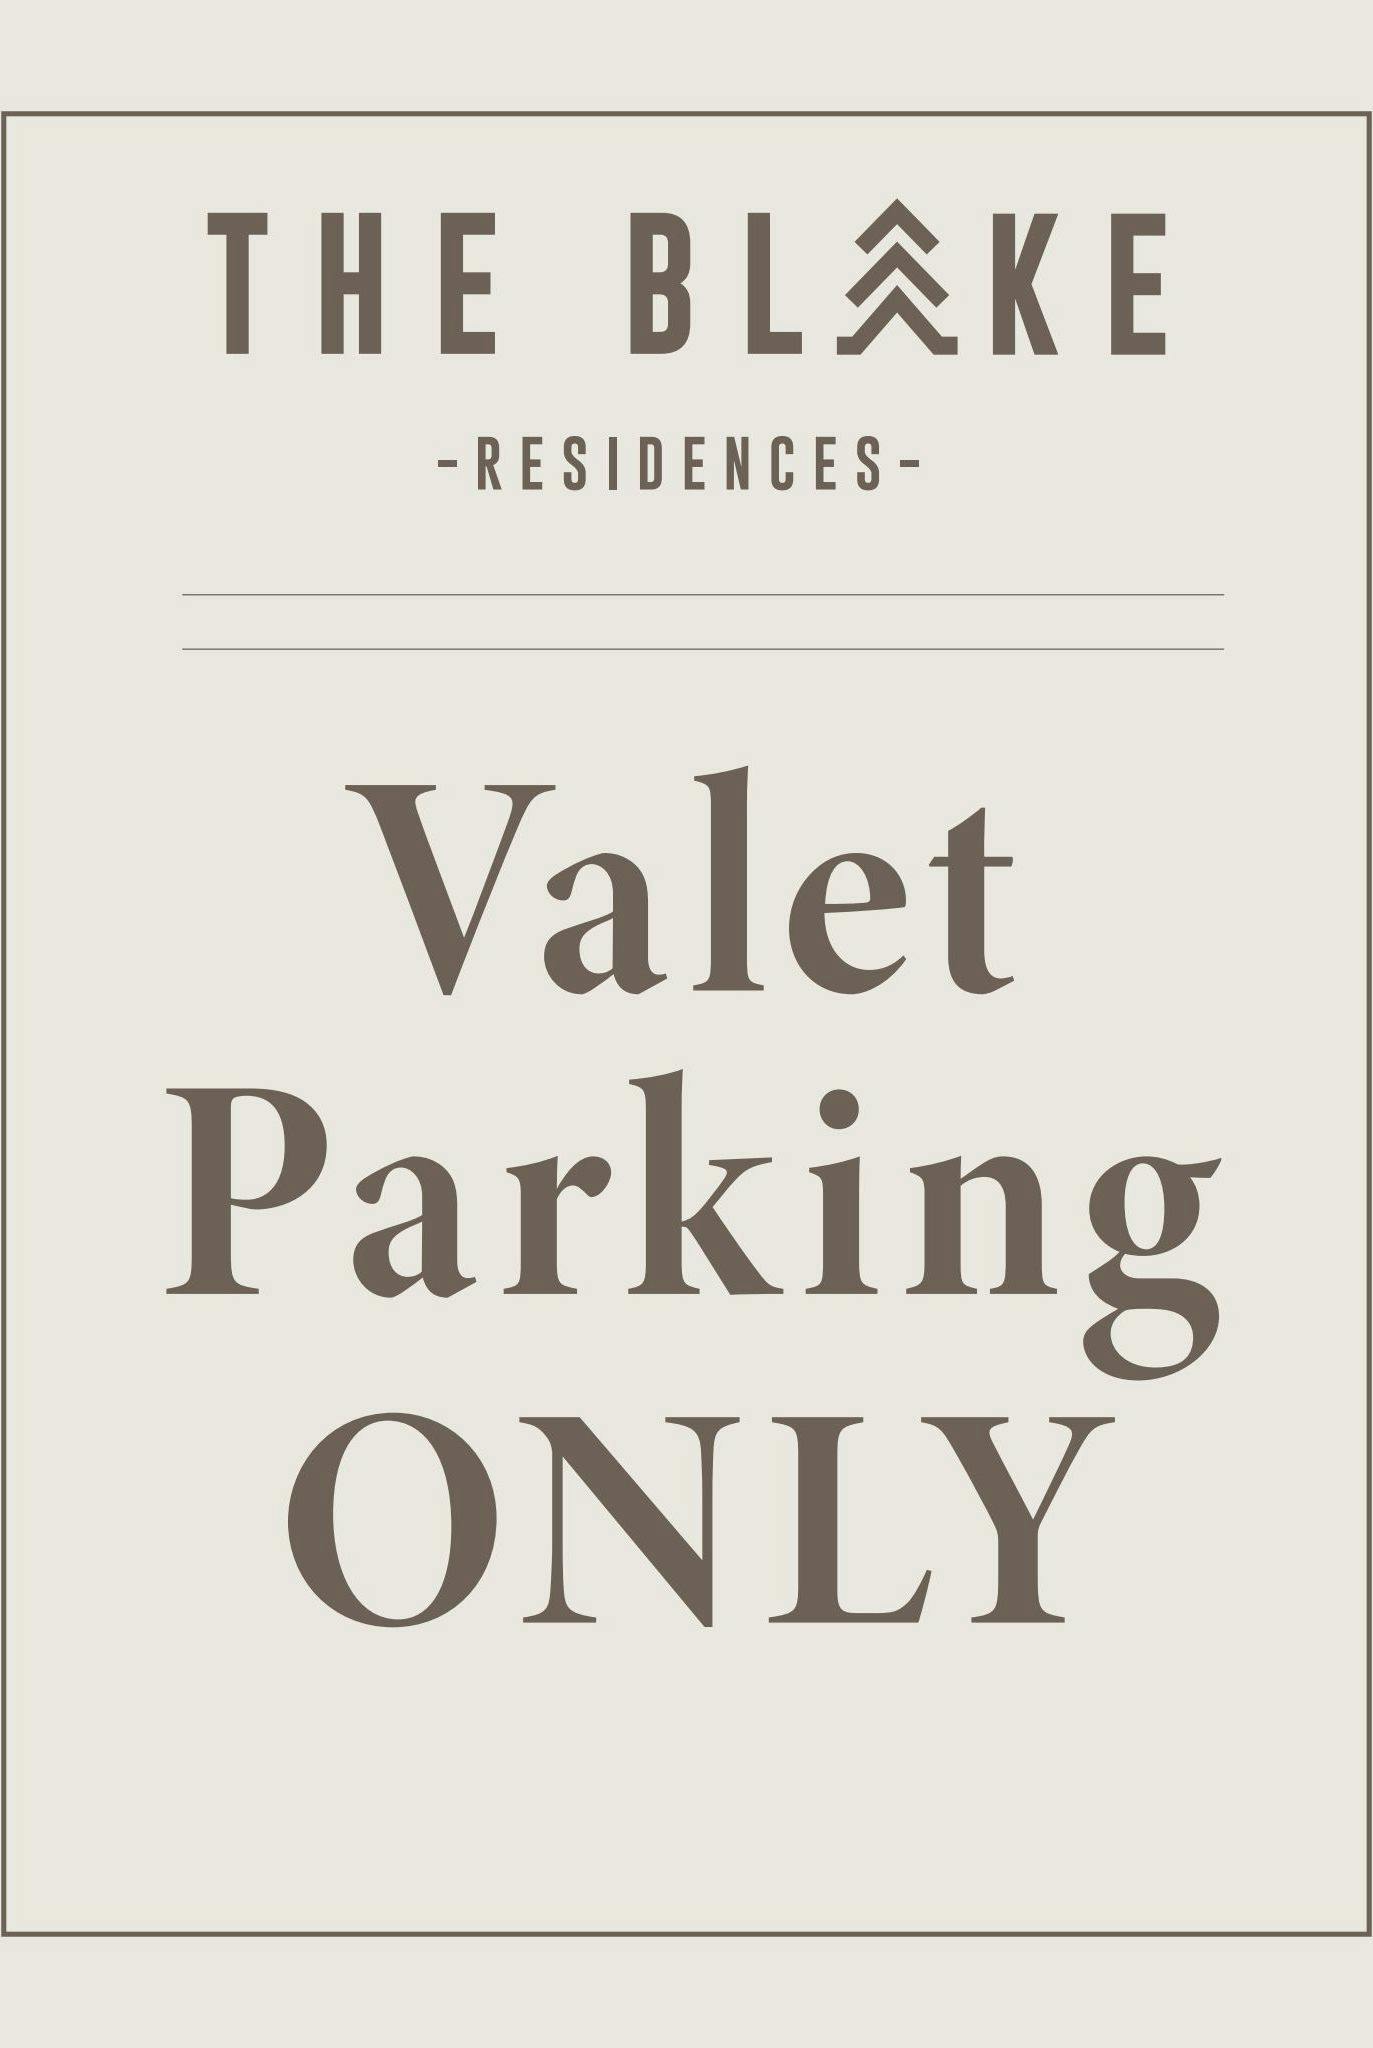 Valet Parking Only sign at The Blake residences